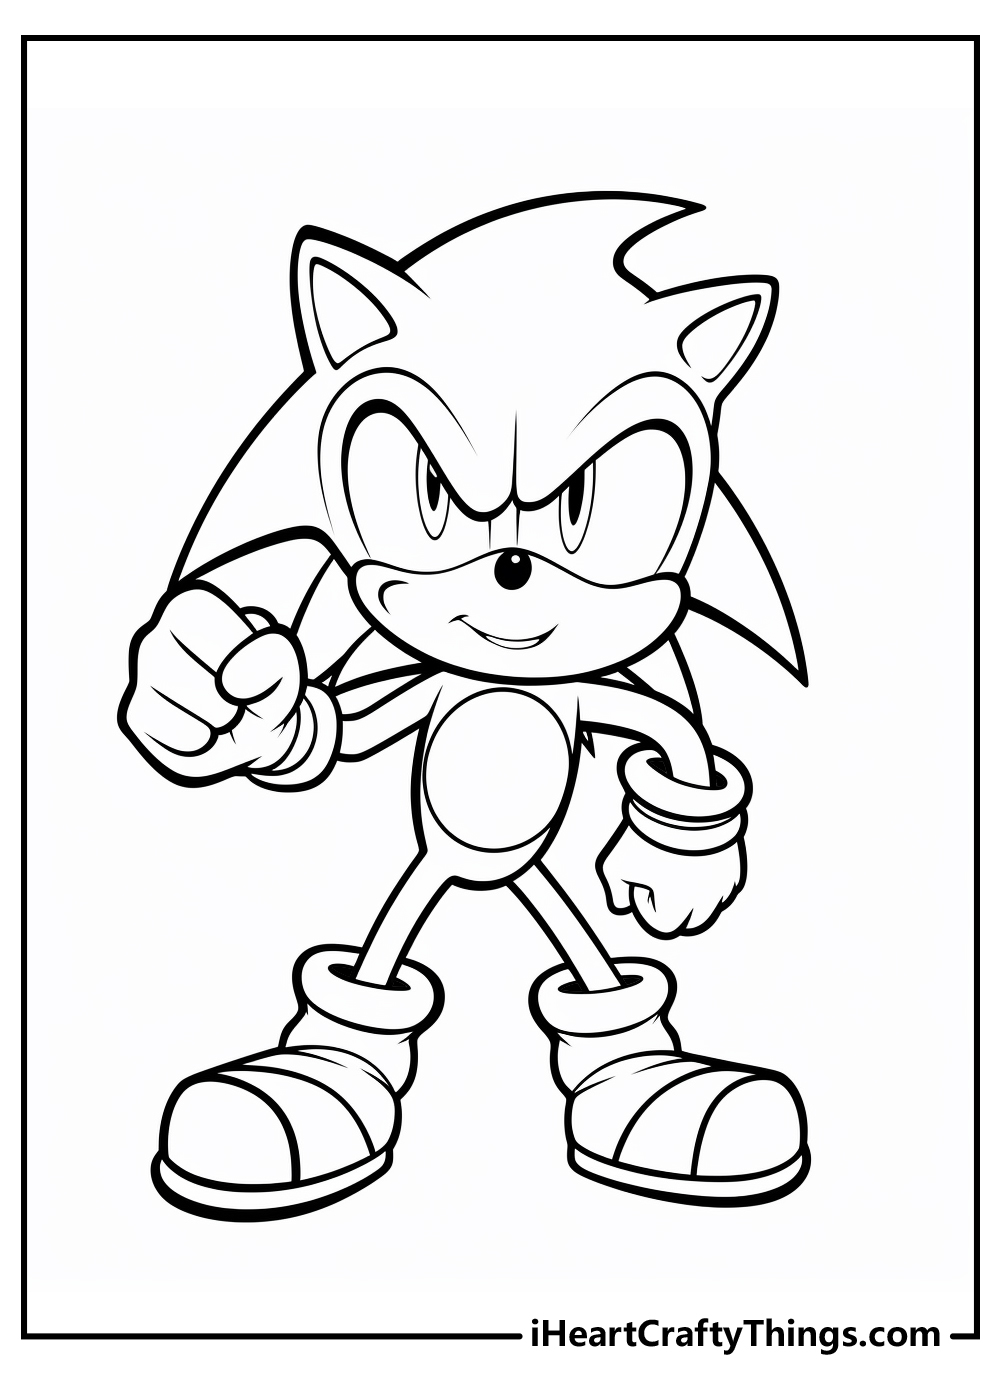 Shadow the Hedgehog Super Shadow Sonic the Hedgehog Coloring book Silver  the Hedgehog, hedghog, angle, white png